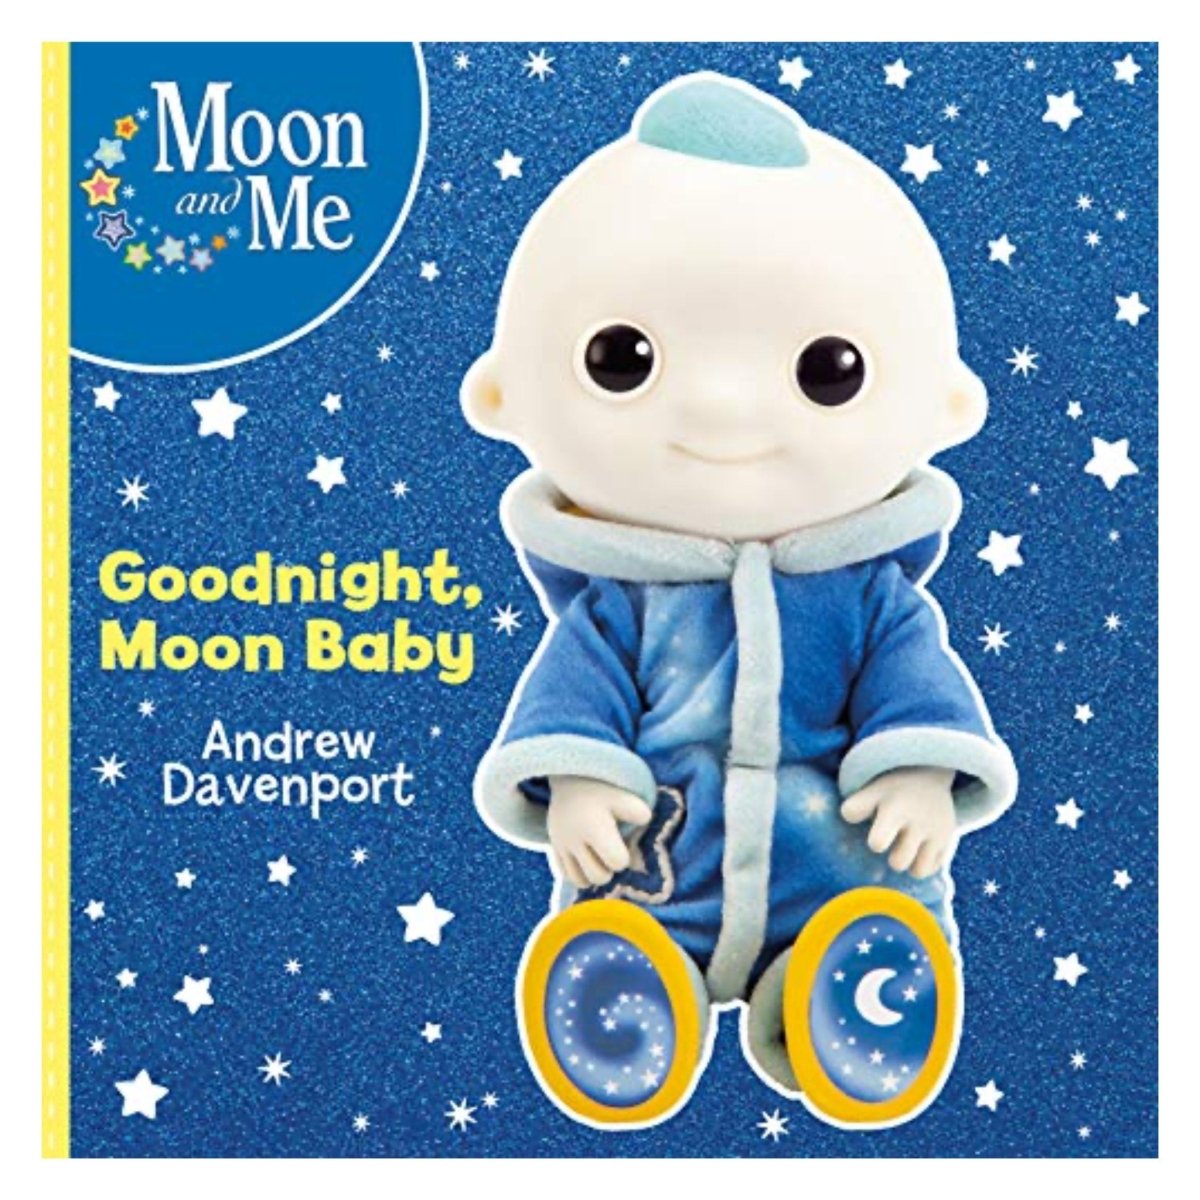 Goodnight, Moon Baby Storybook - Kids Party Craft